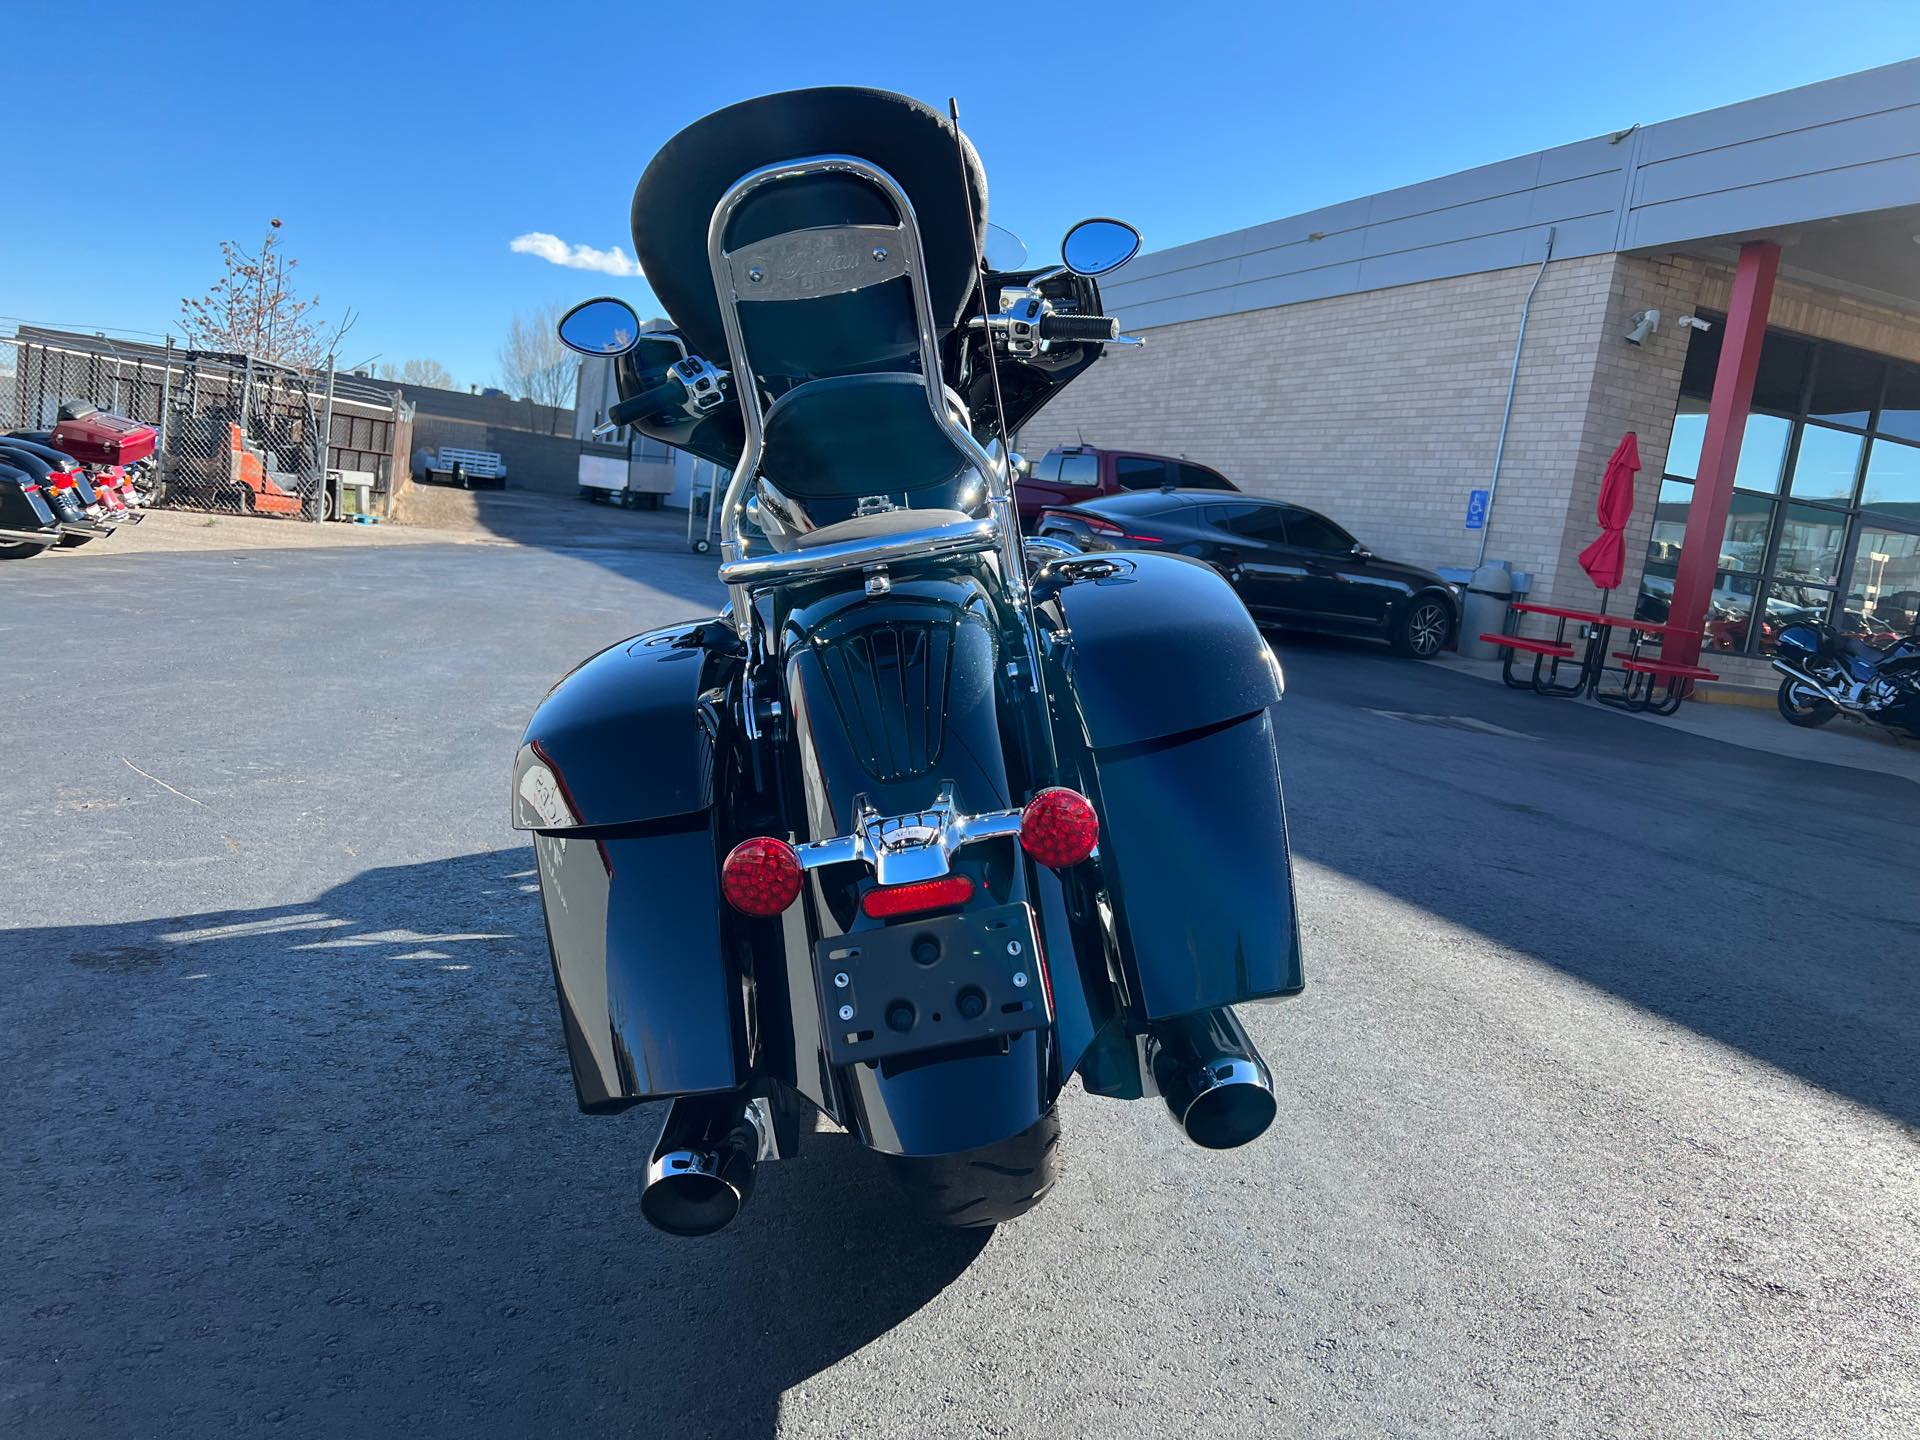 2020 Indian Chieftain Limited at Aces Motorcycles - Fort Collins